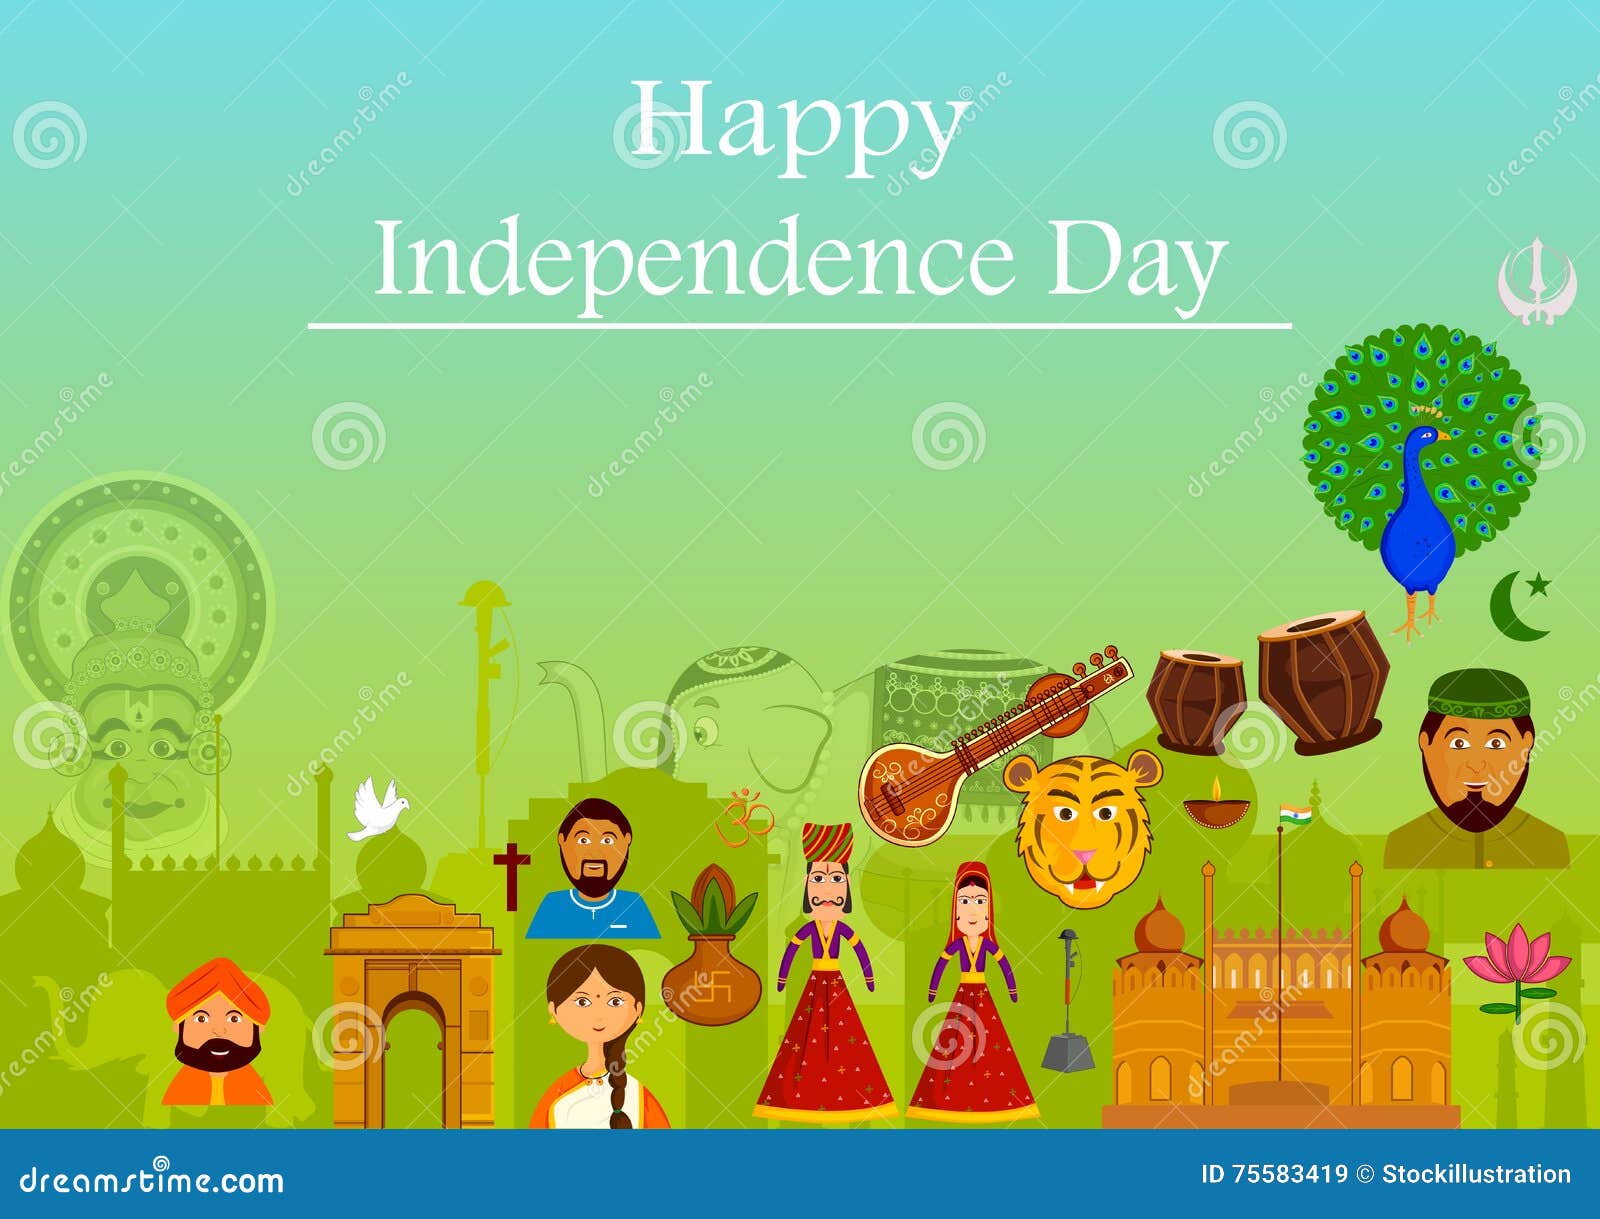 Happy Independence Day of India Stock Vector - Illustration of design ...